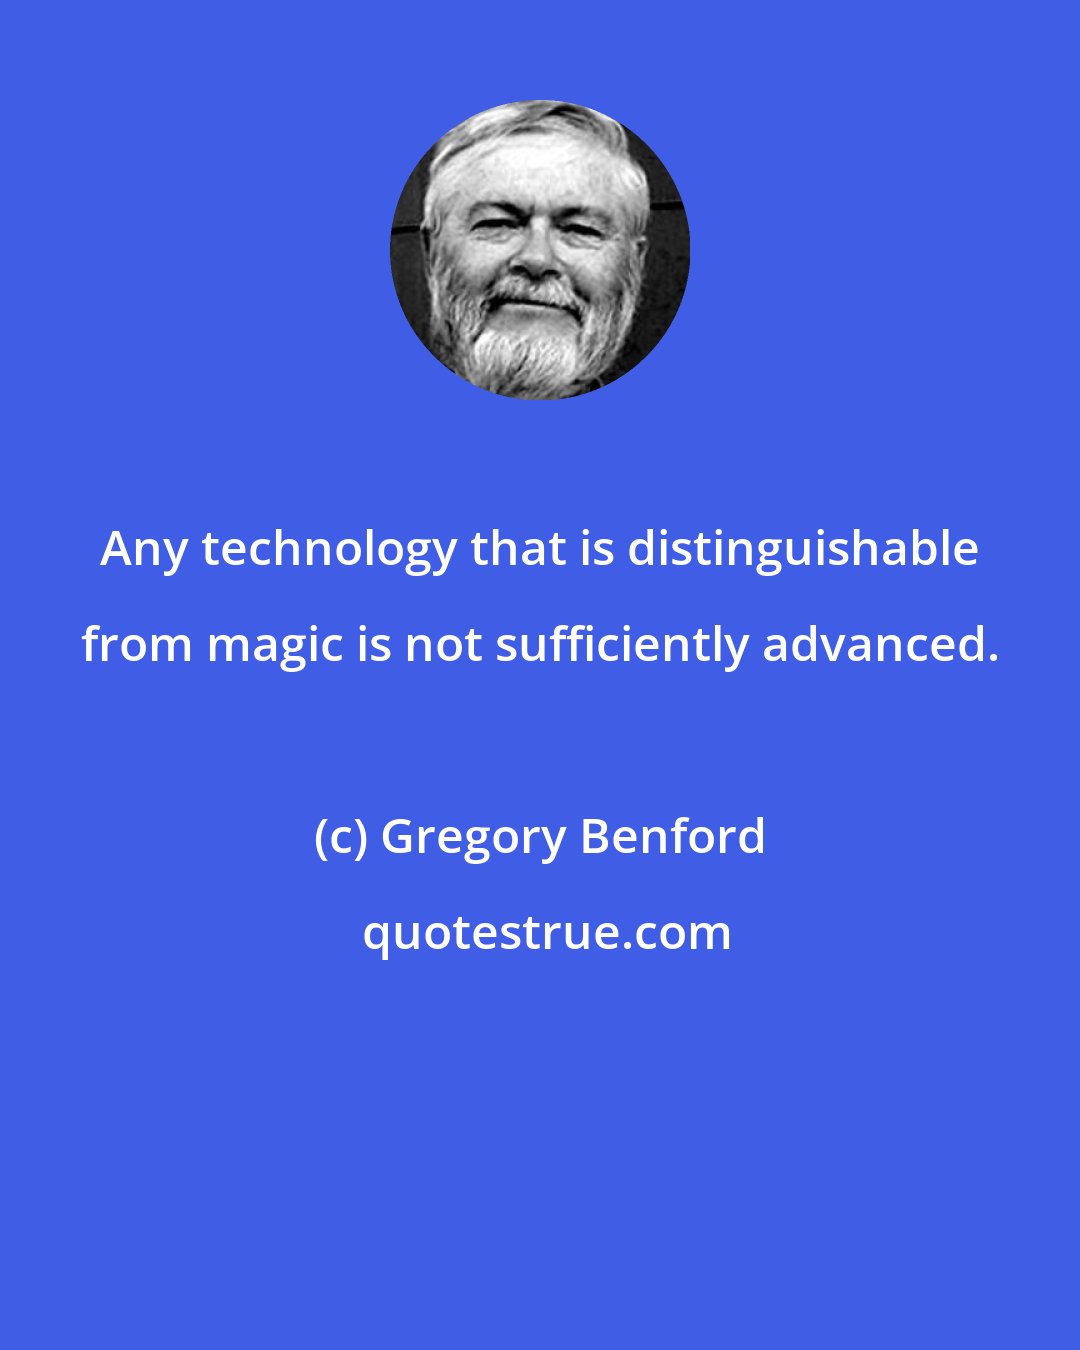 Gregory Benford: Any technology that is distinguishable from magic is not sufficiently advanced.